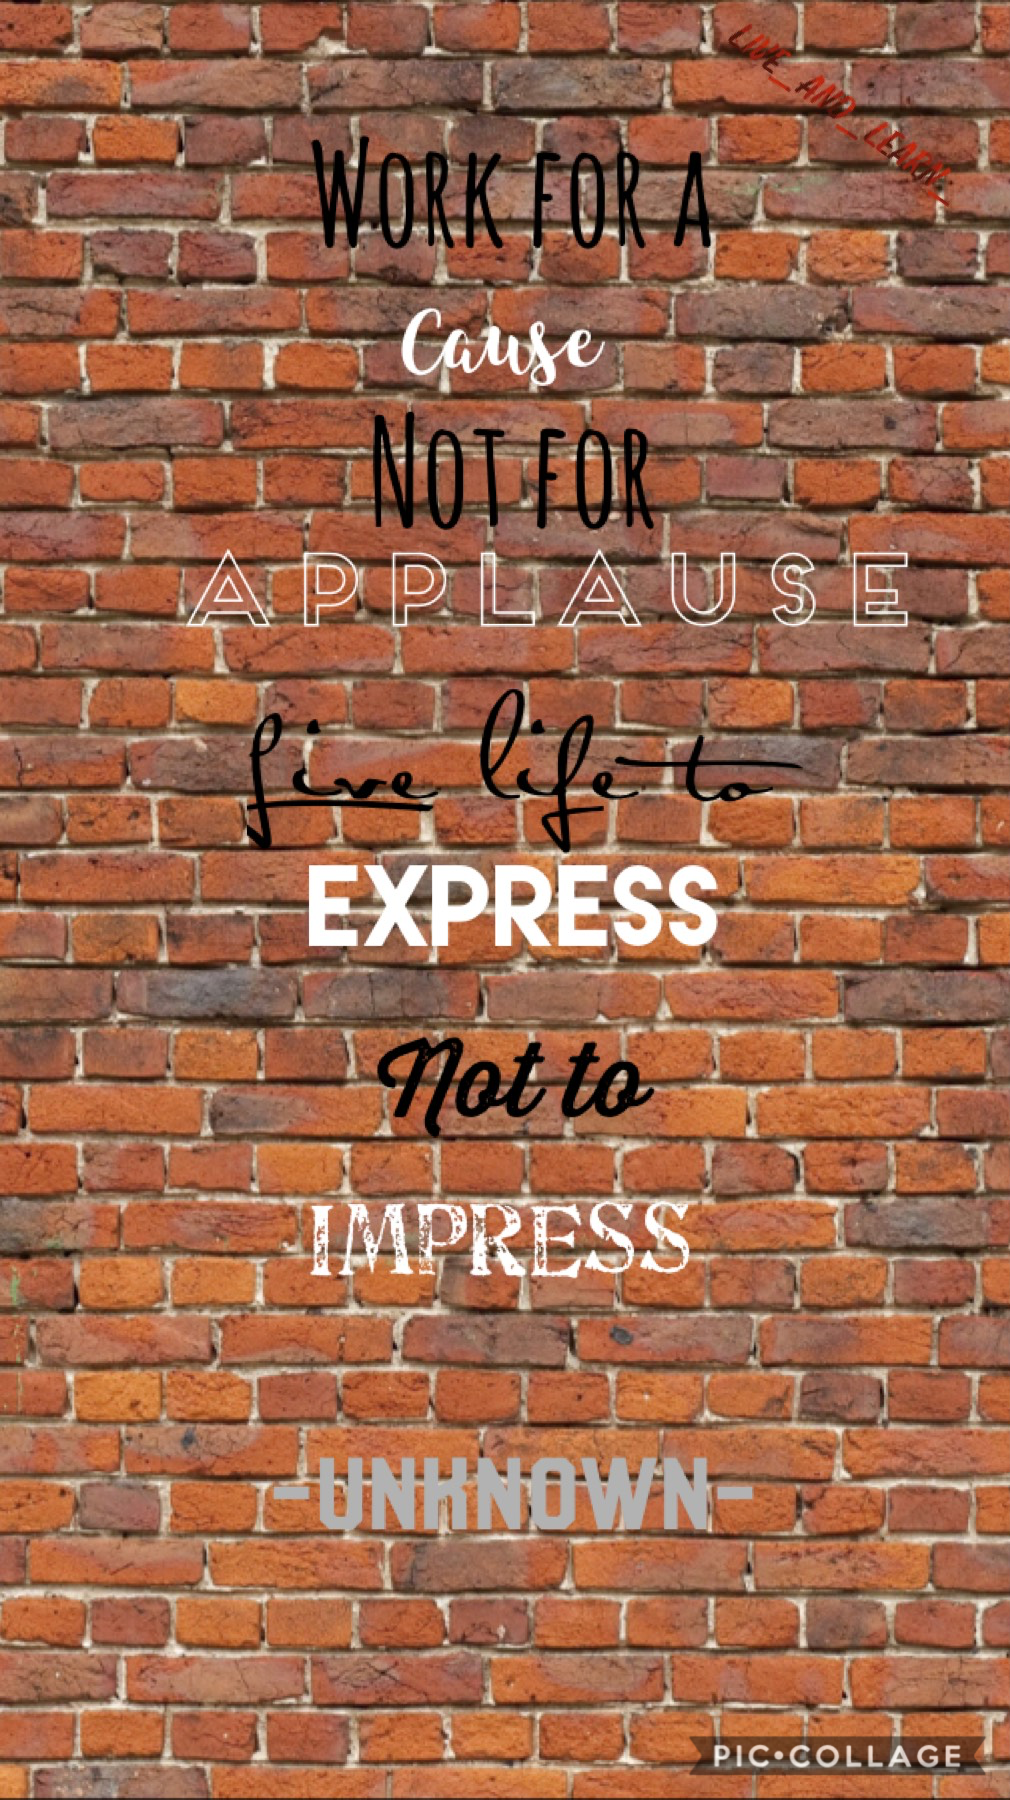 “Work for a cause, not for applause. Live life to express, not to impress “ Enjoy!!